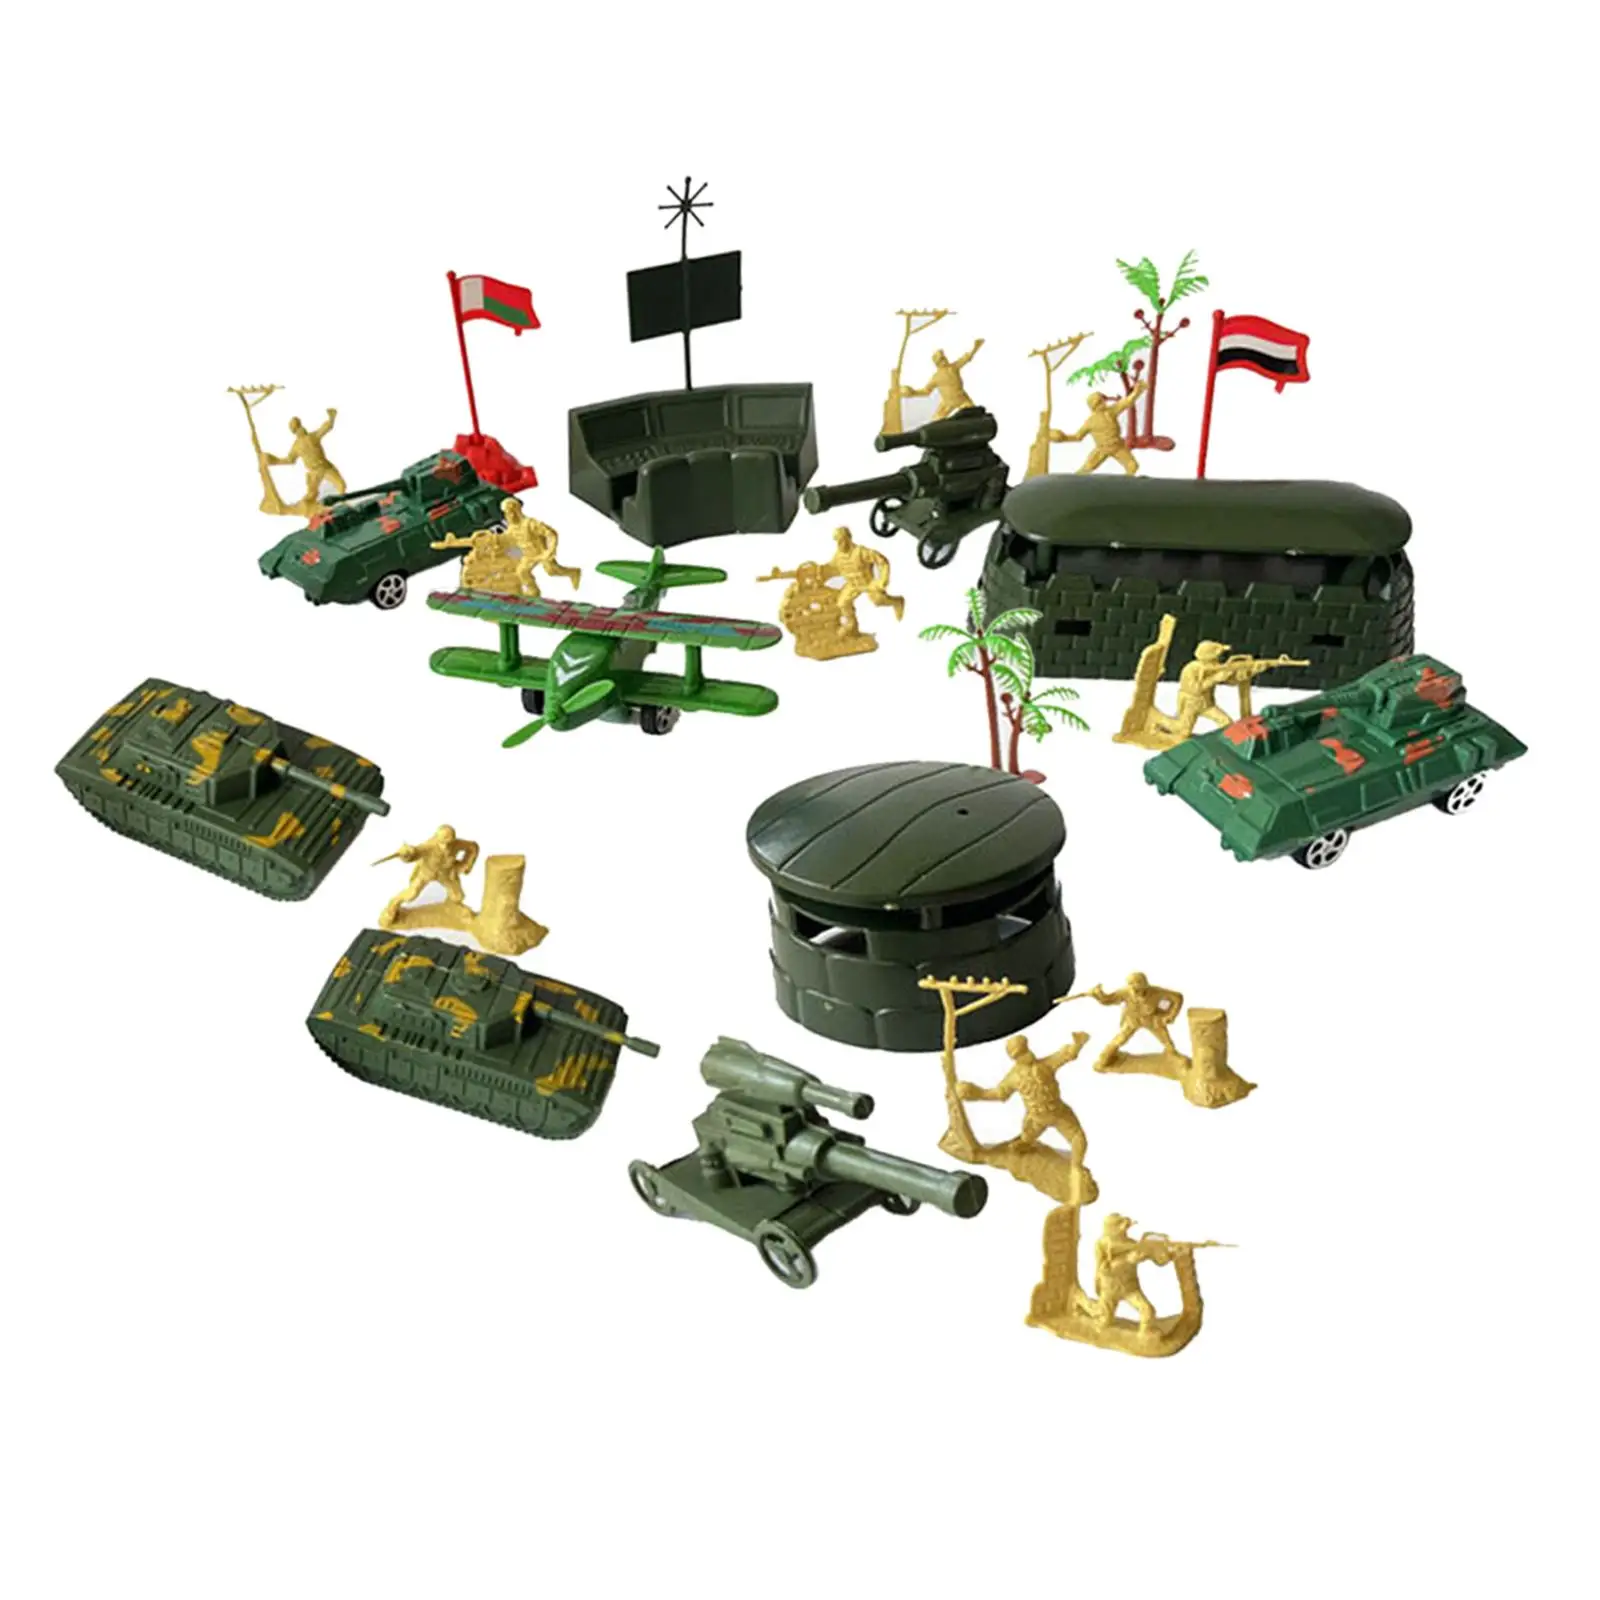 25 Pieces Miniatures Model Soldier Figures Toys Playset Diorama Model Men Figures Soldiers for Adults Kids Children Teens Boys